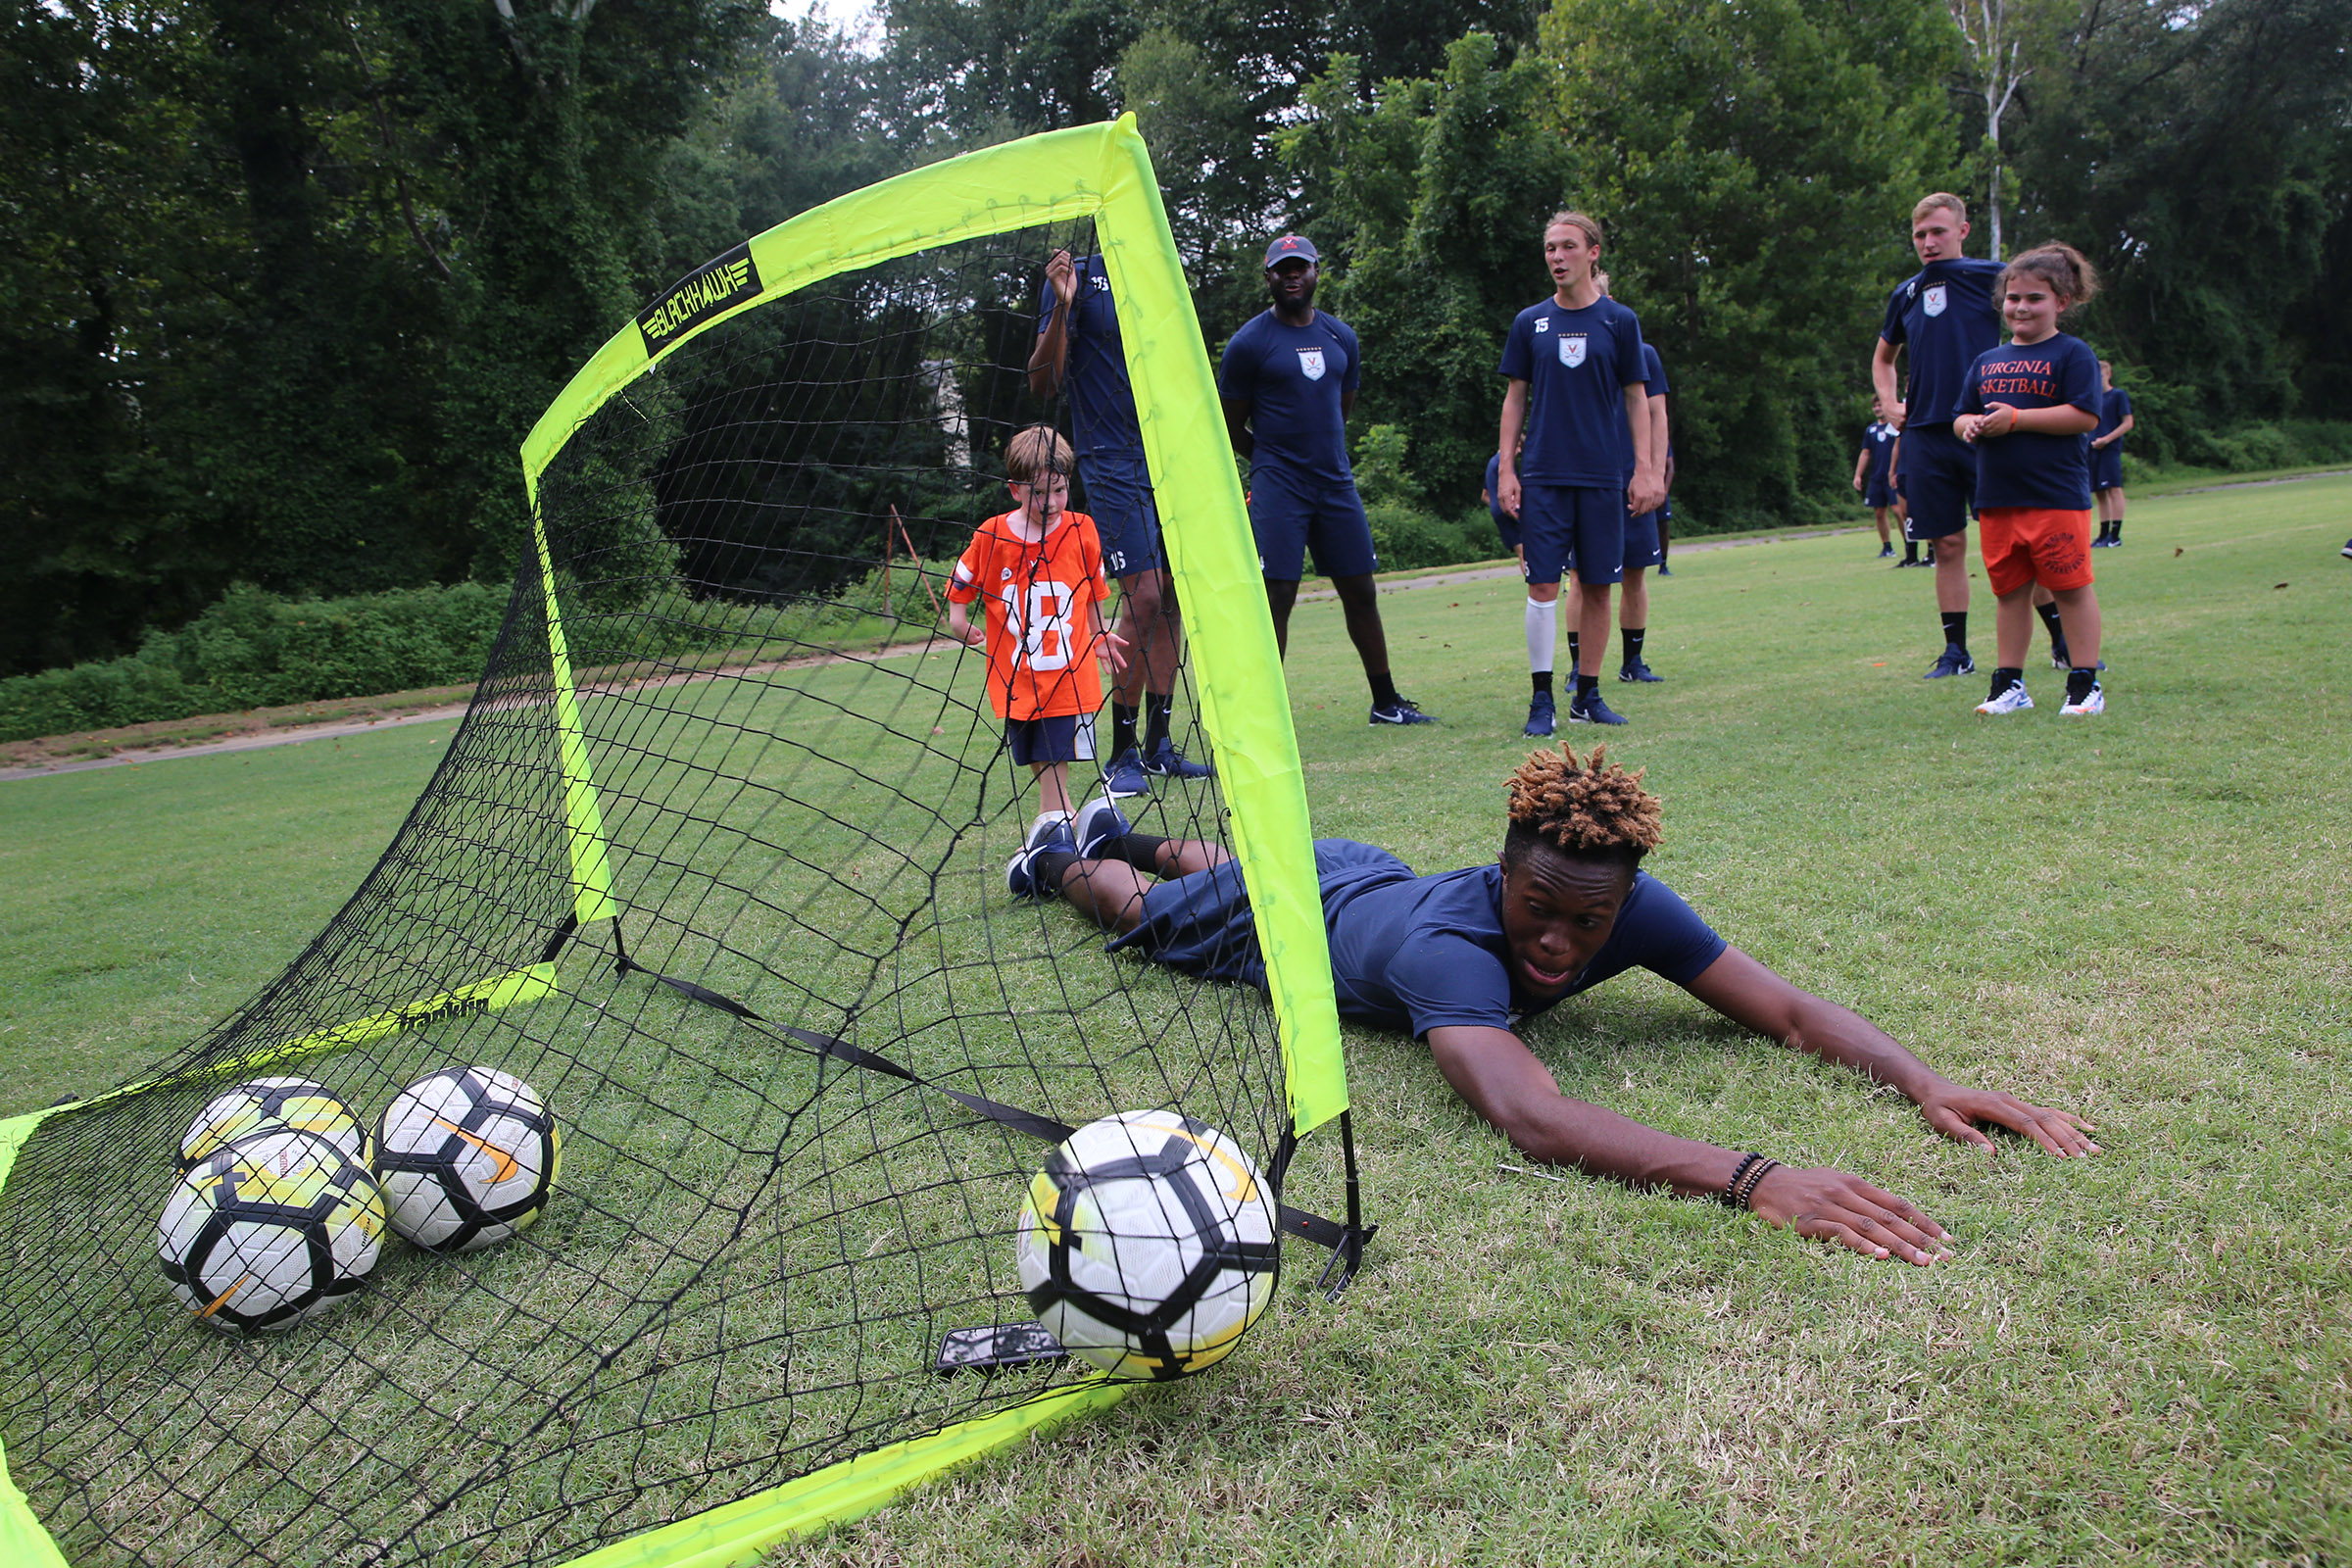 Simeon Okoro lays on the ground as a small kid makes a soccer goal